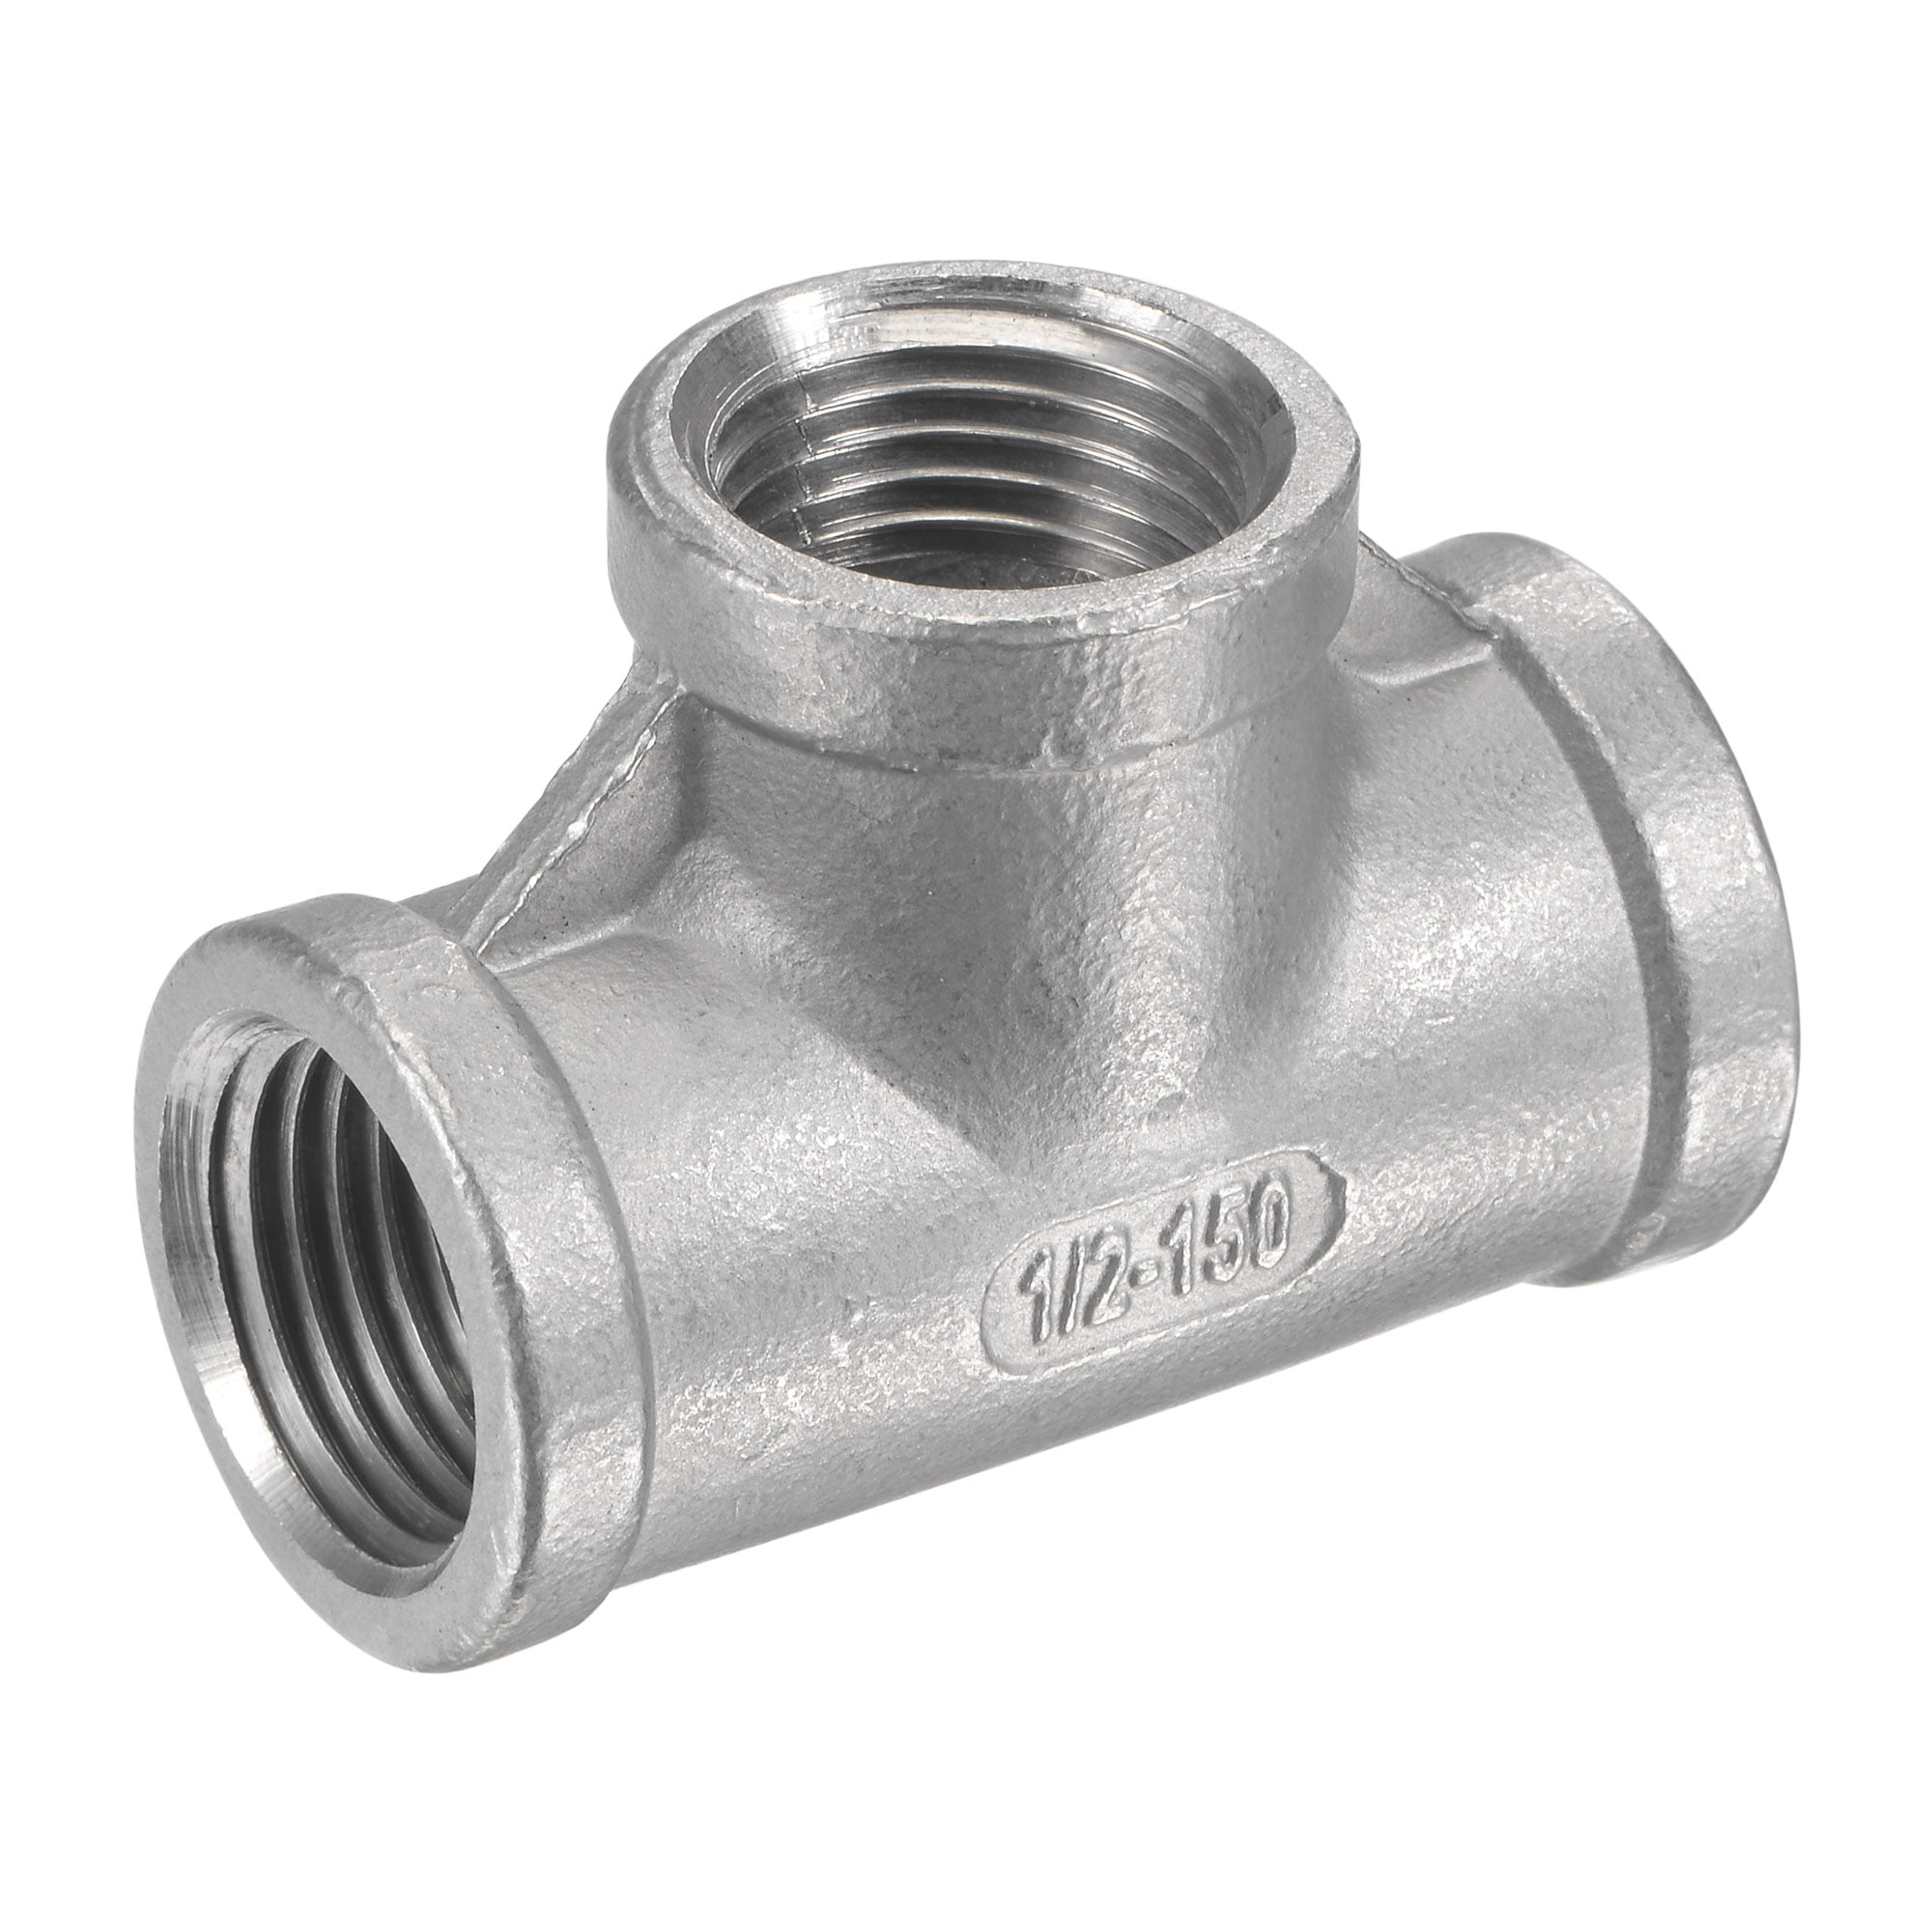 TEE 150# 304 STAINLESS STEEL 1/2" NPT FITTING BREWING PIPE FITTING 